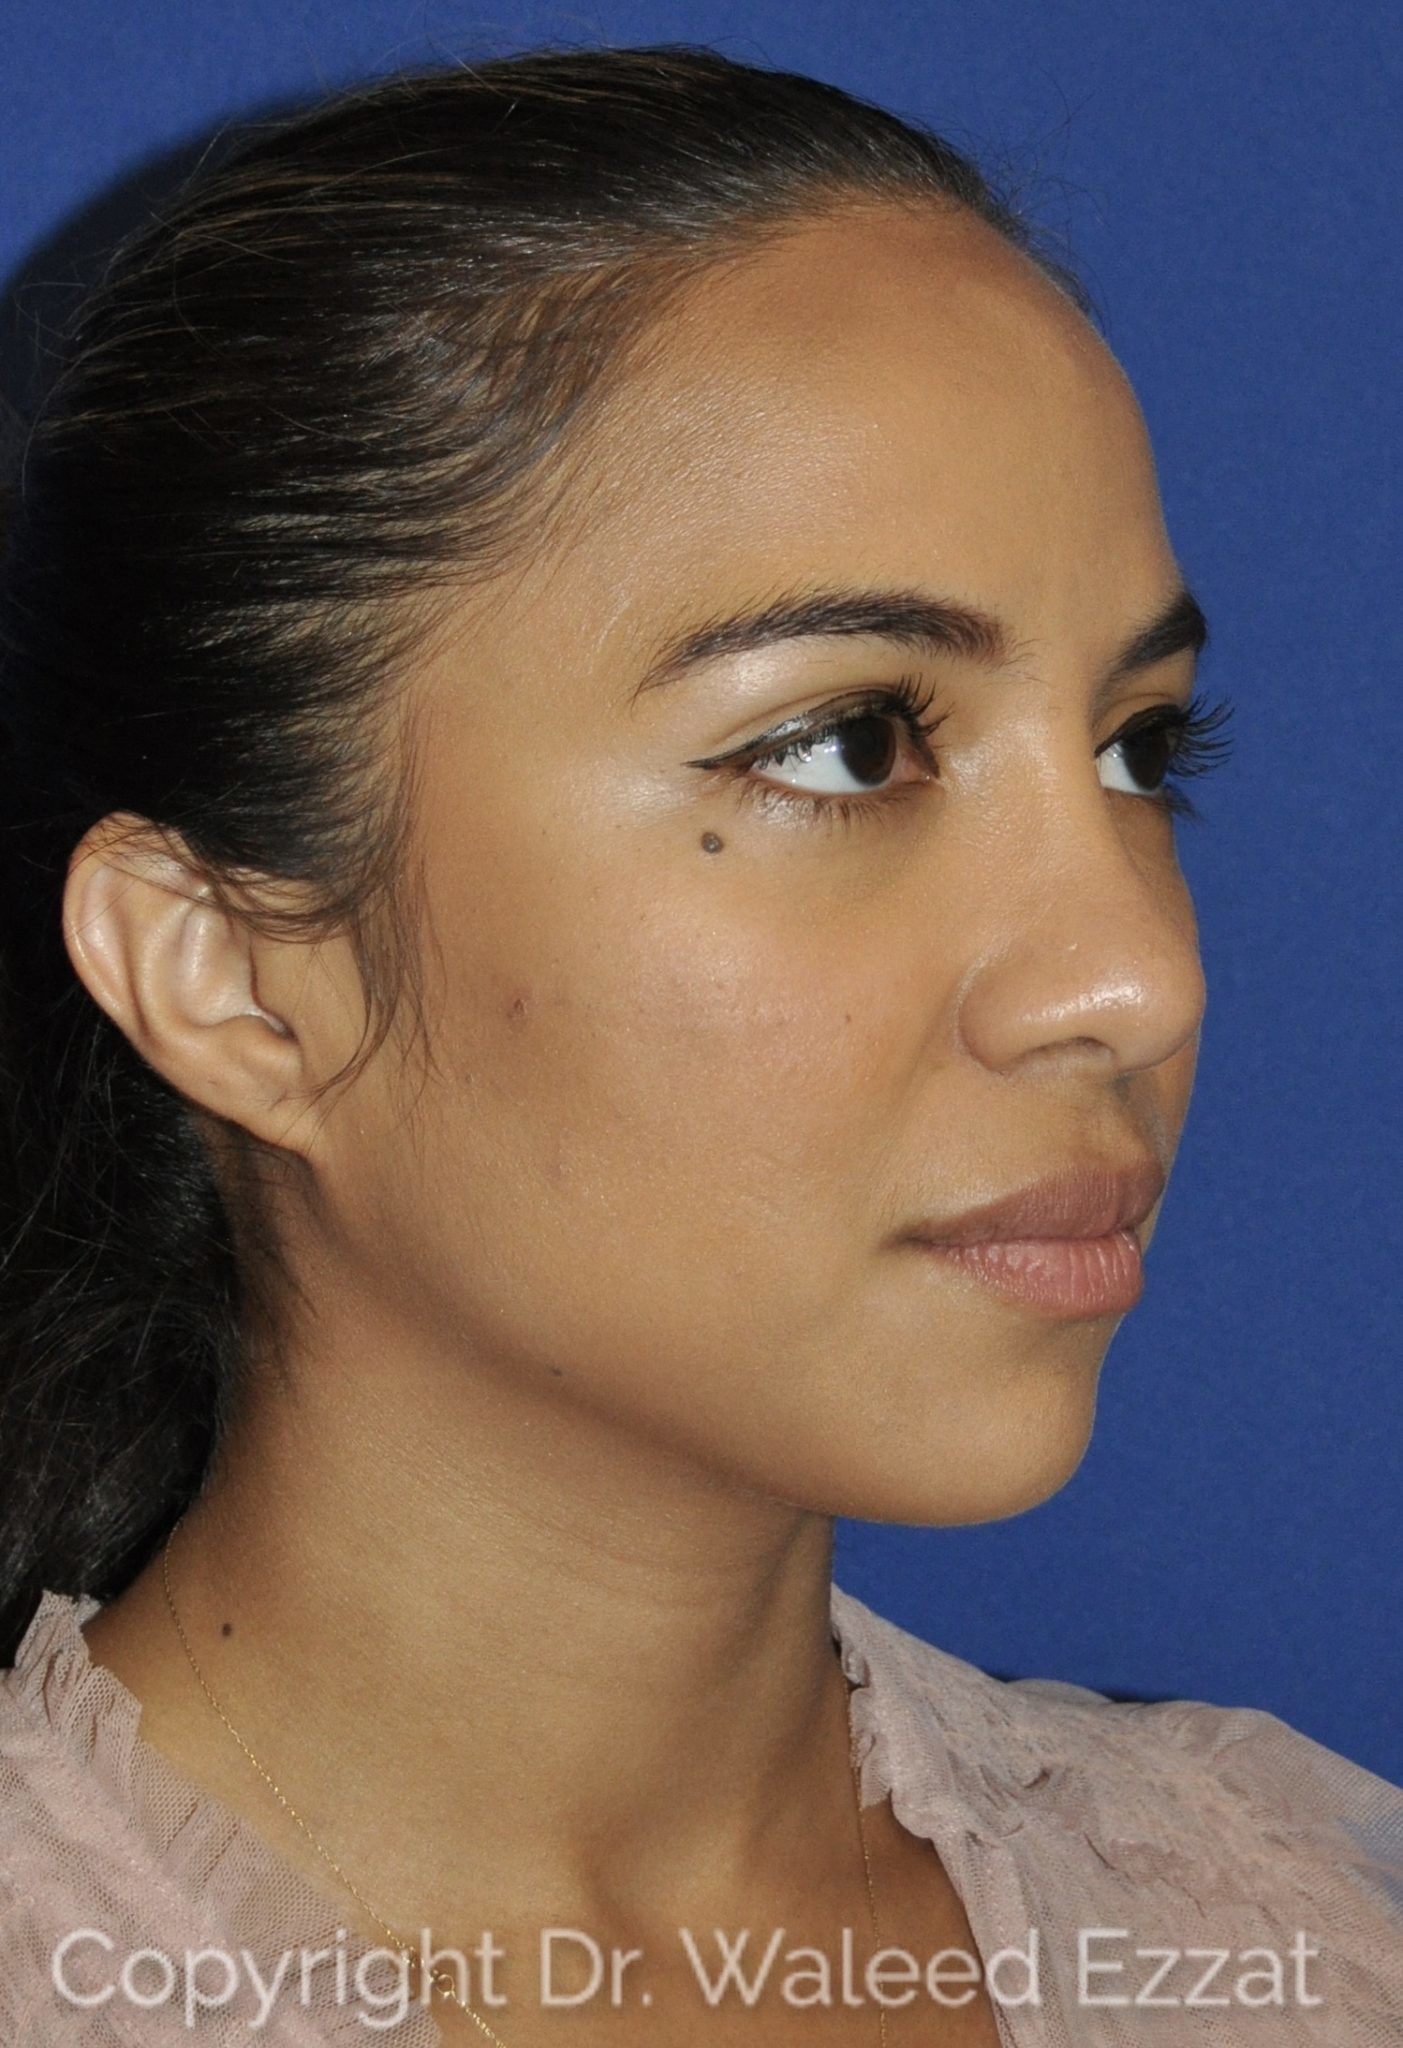 Hispanic/South American Rhinoplasty Patient Photo - Case 21-2 - after view-1